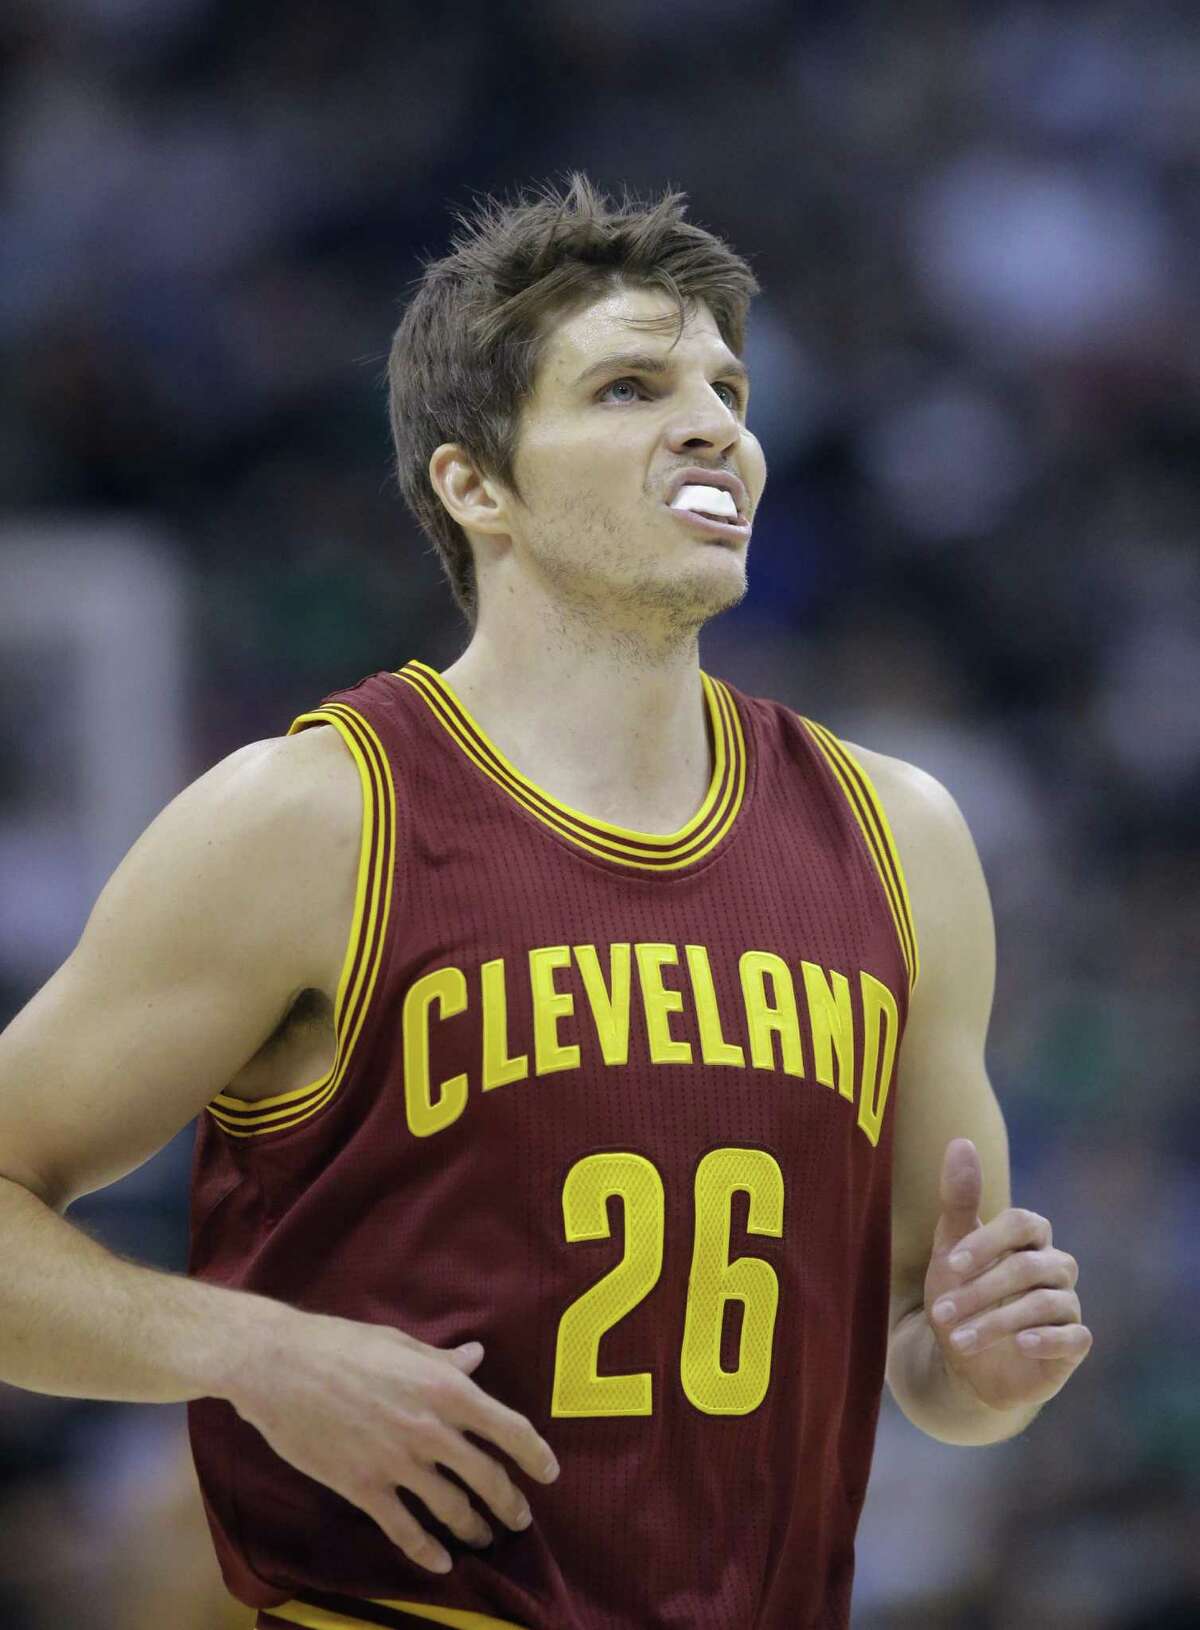 Cleveland Cavaliers guard Kyle Korver runs up court in the first half during against the Utah Jazz on Jan. 10, 2017, in Salt Lake City.